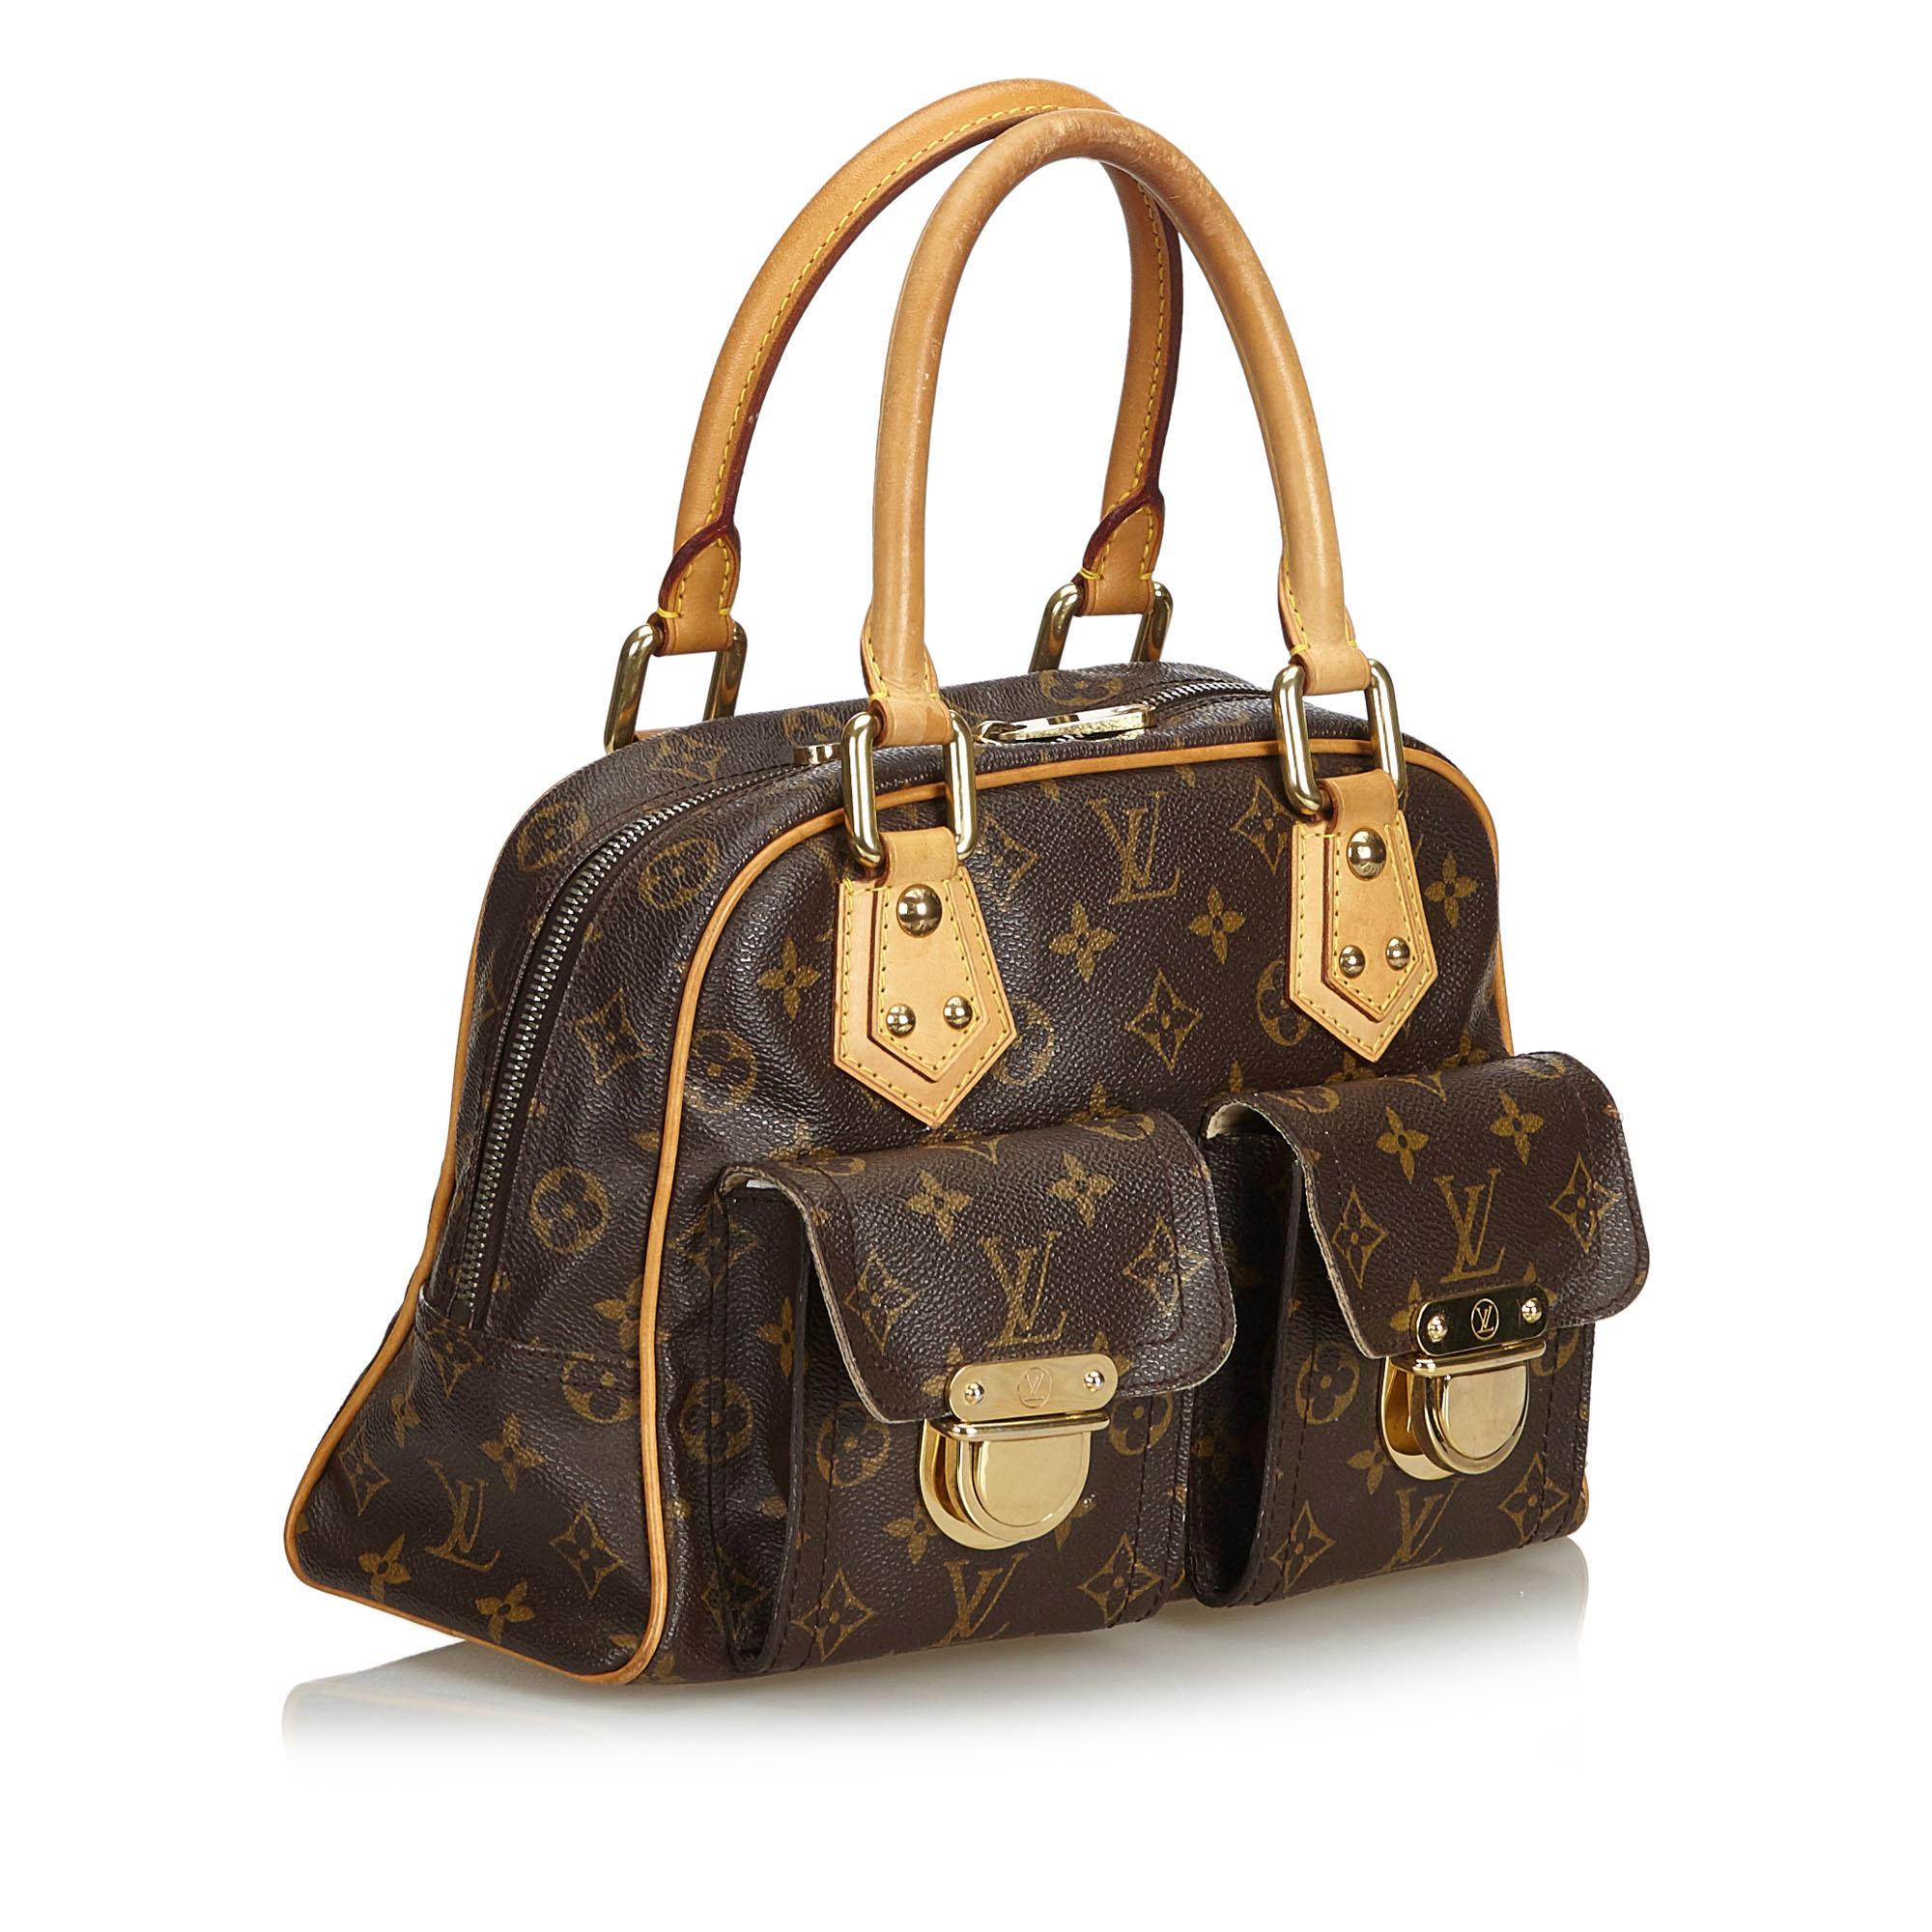 The Manhattan GM features a monogram canvas body, rolled leather handles, exterior flap pockets with gold-tone hardware and push lock closures, a top zip closure, and an interior slip pocket. It carries as B condition rating.

Inclusions: 
This item